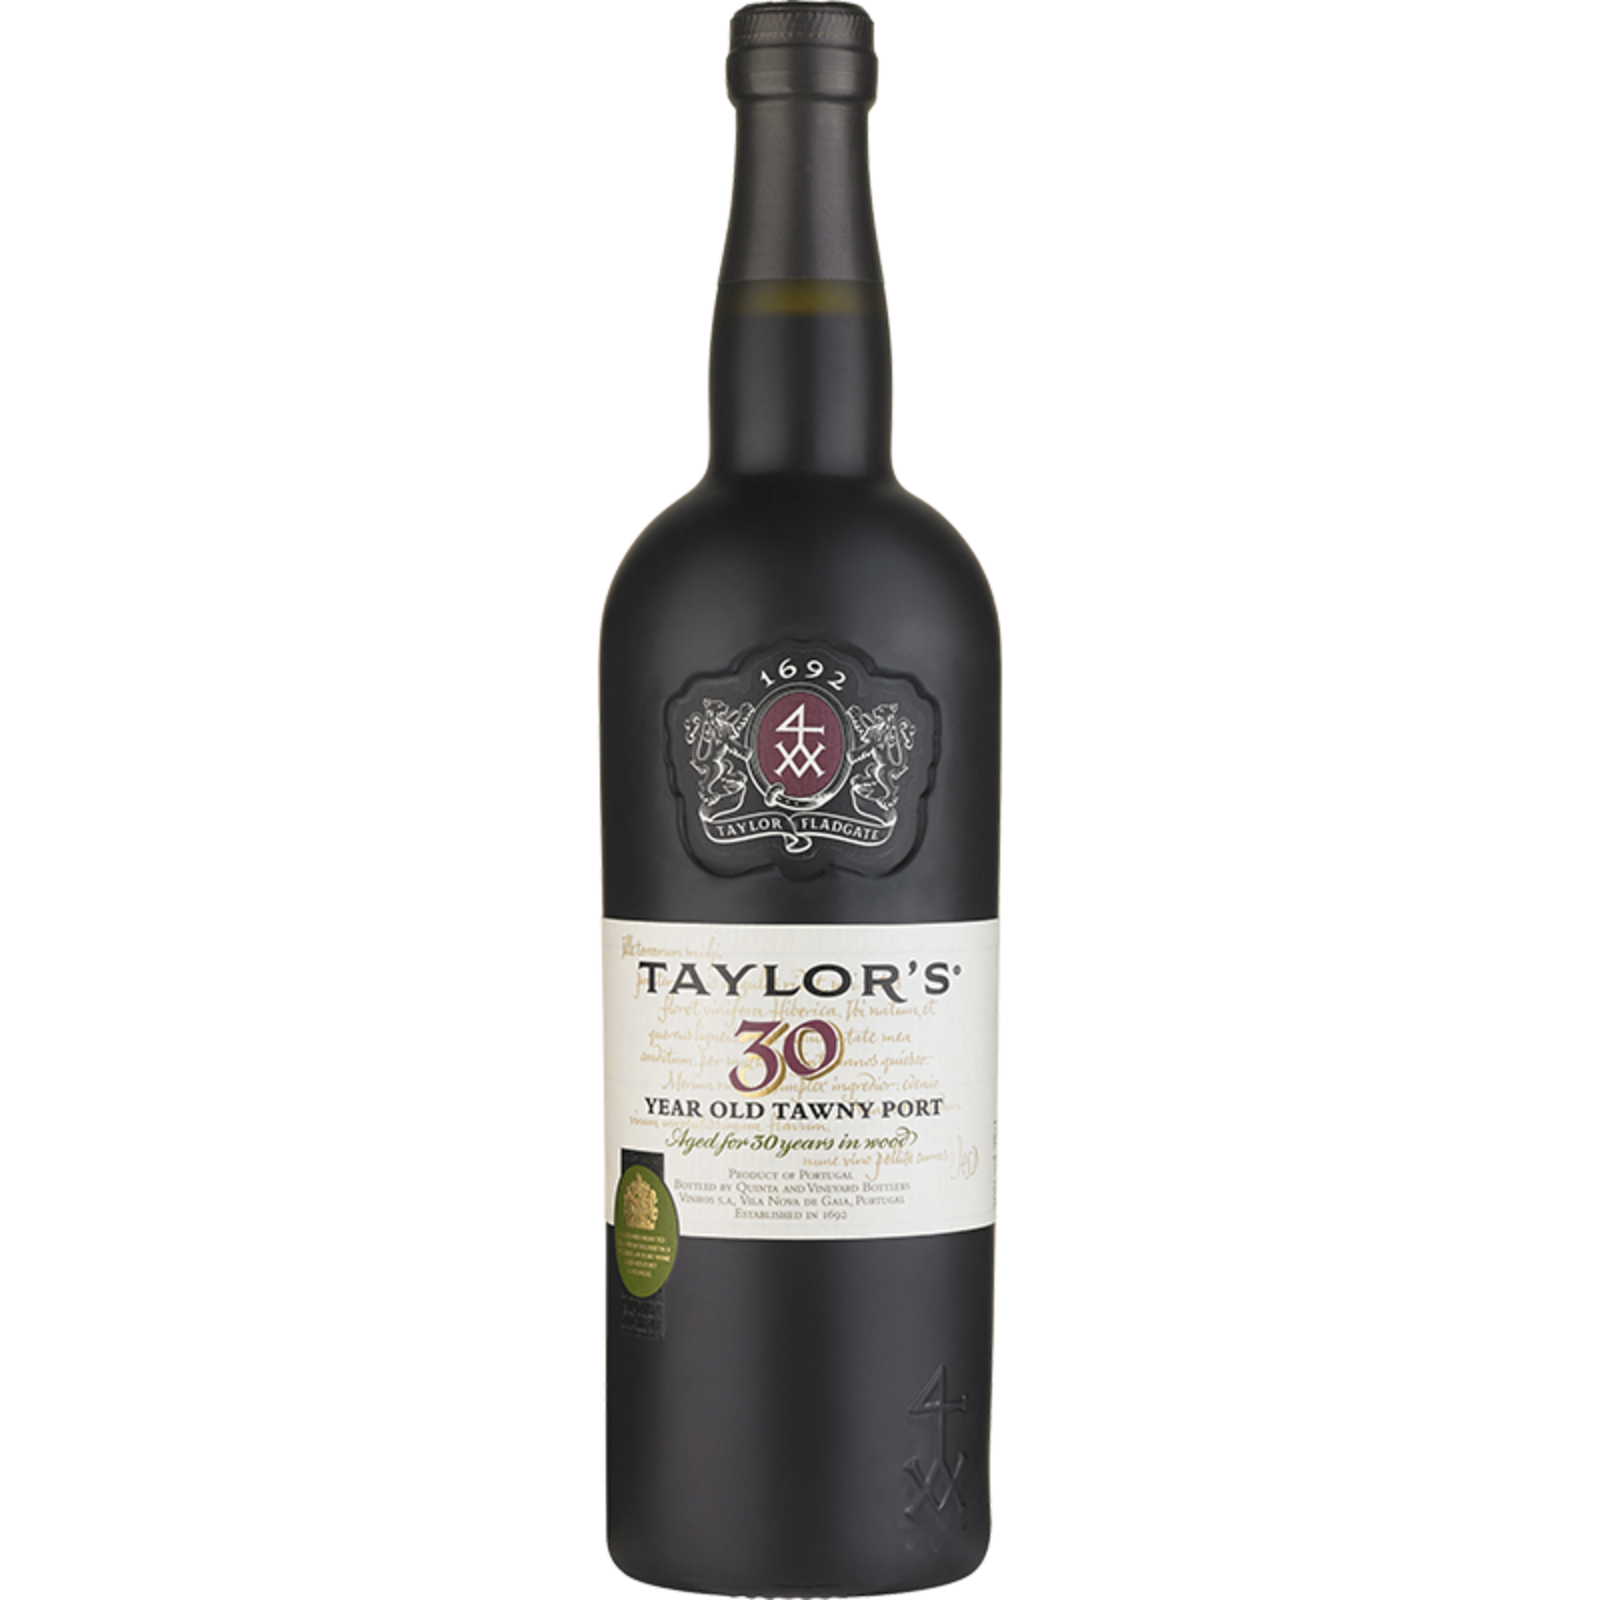 Taylor's Taylor's 30 Year Old Tawny Port